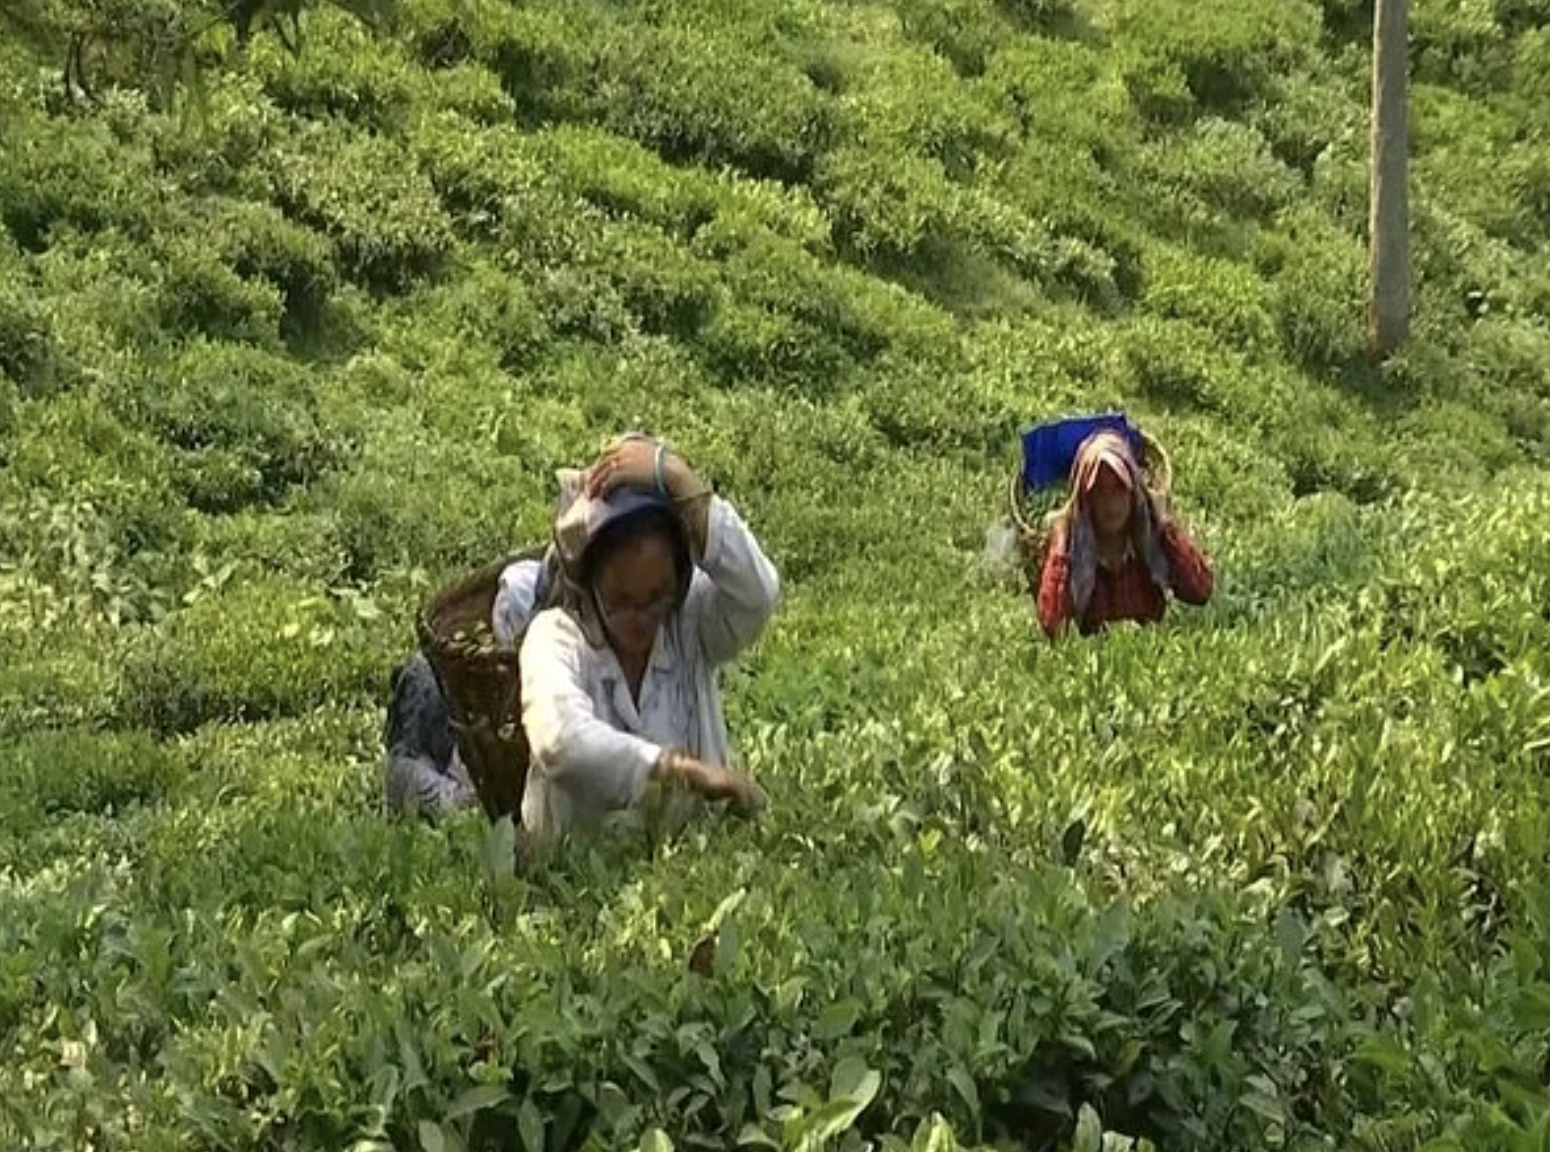 north-indias-tea-industry-faces-major-crisis-with-production-down-60-mn-kilos-amid-extreme-weather